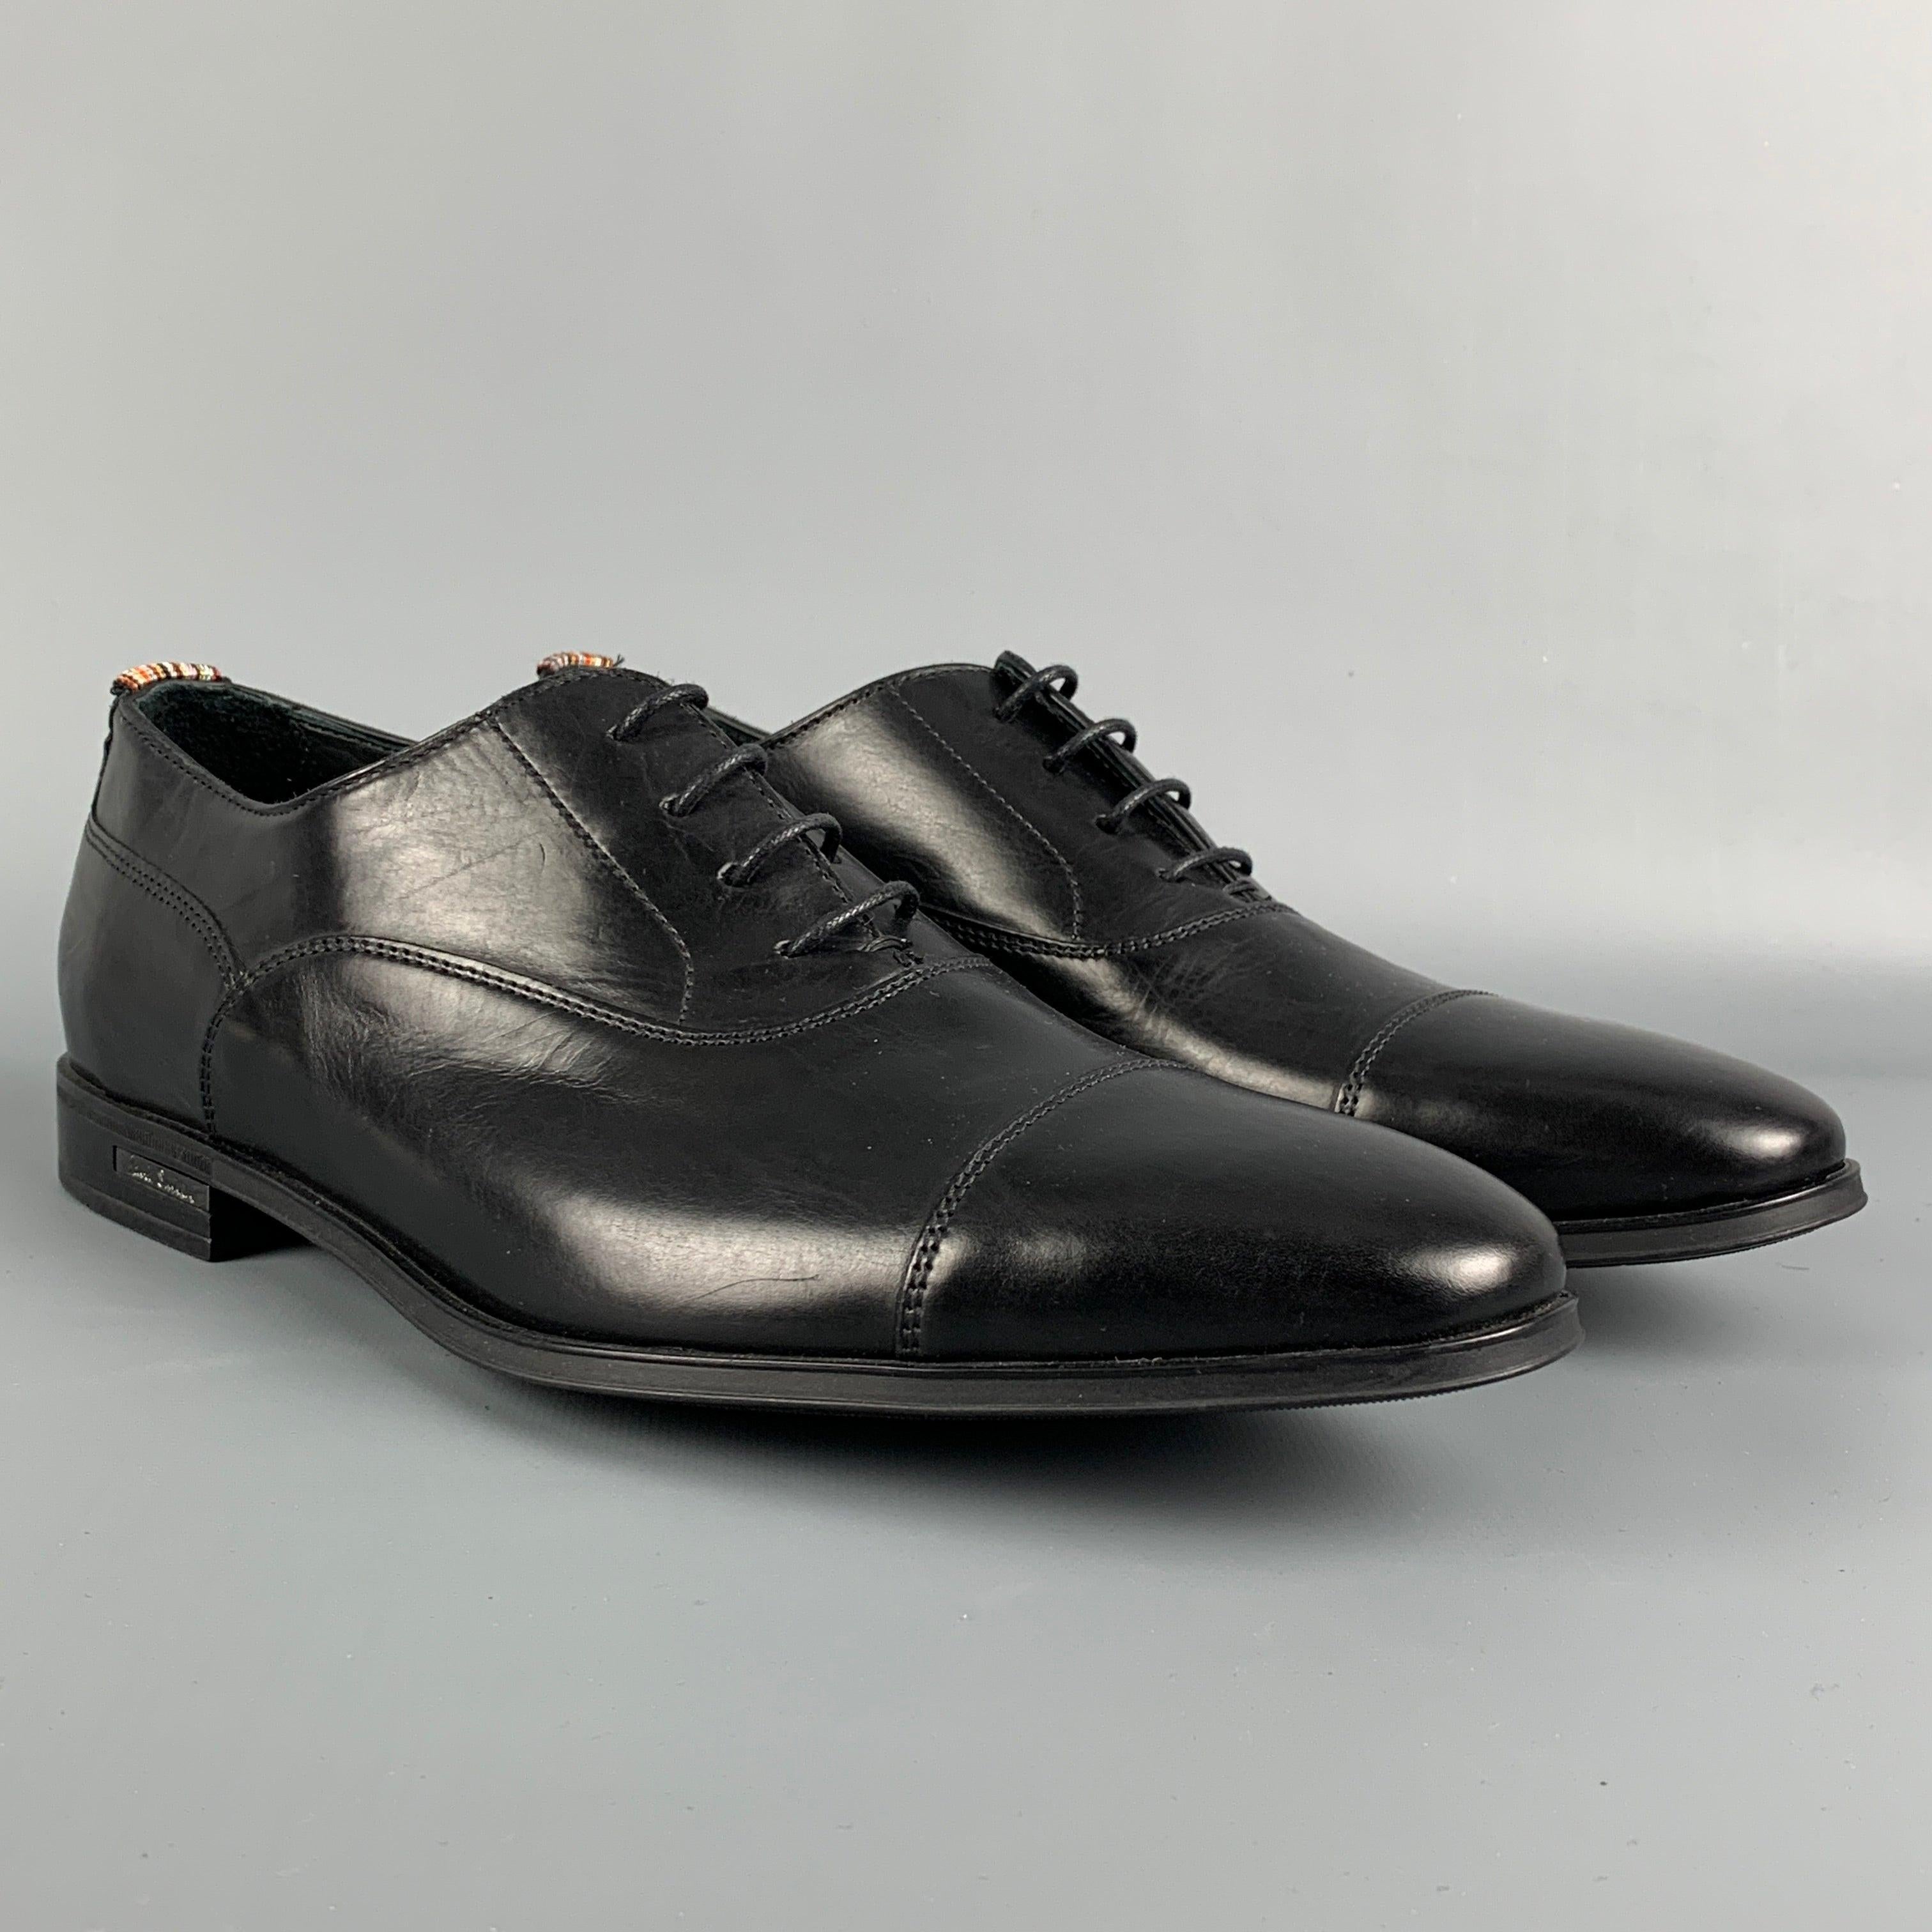 PAUL SMITH dress shoes comes in a black leather featuring a cap toe and a lace up closure. Made in Italy.
Very Good
Pre-Owned Condition. 

Marked:   V204 7 41Outsole: 11.5 inches  x 4 inches 
  
  
 
Reference: 113840
Category: Lace Up Shoes
More